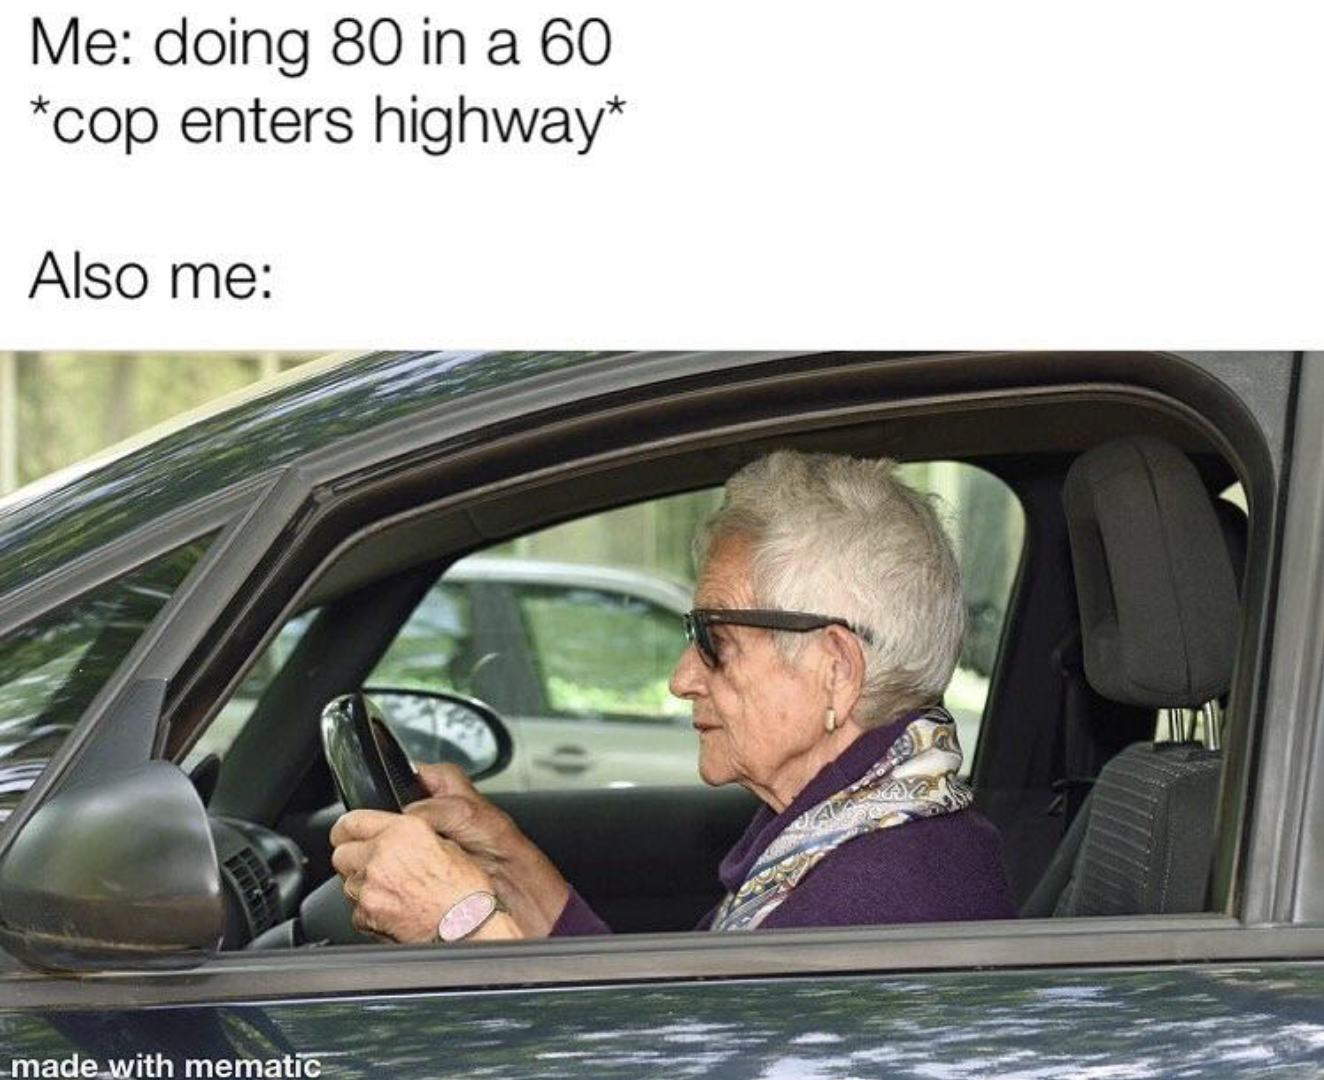 vehicle door - Me doing 80 in a 60 cop enters highway Also me made with mematic